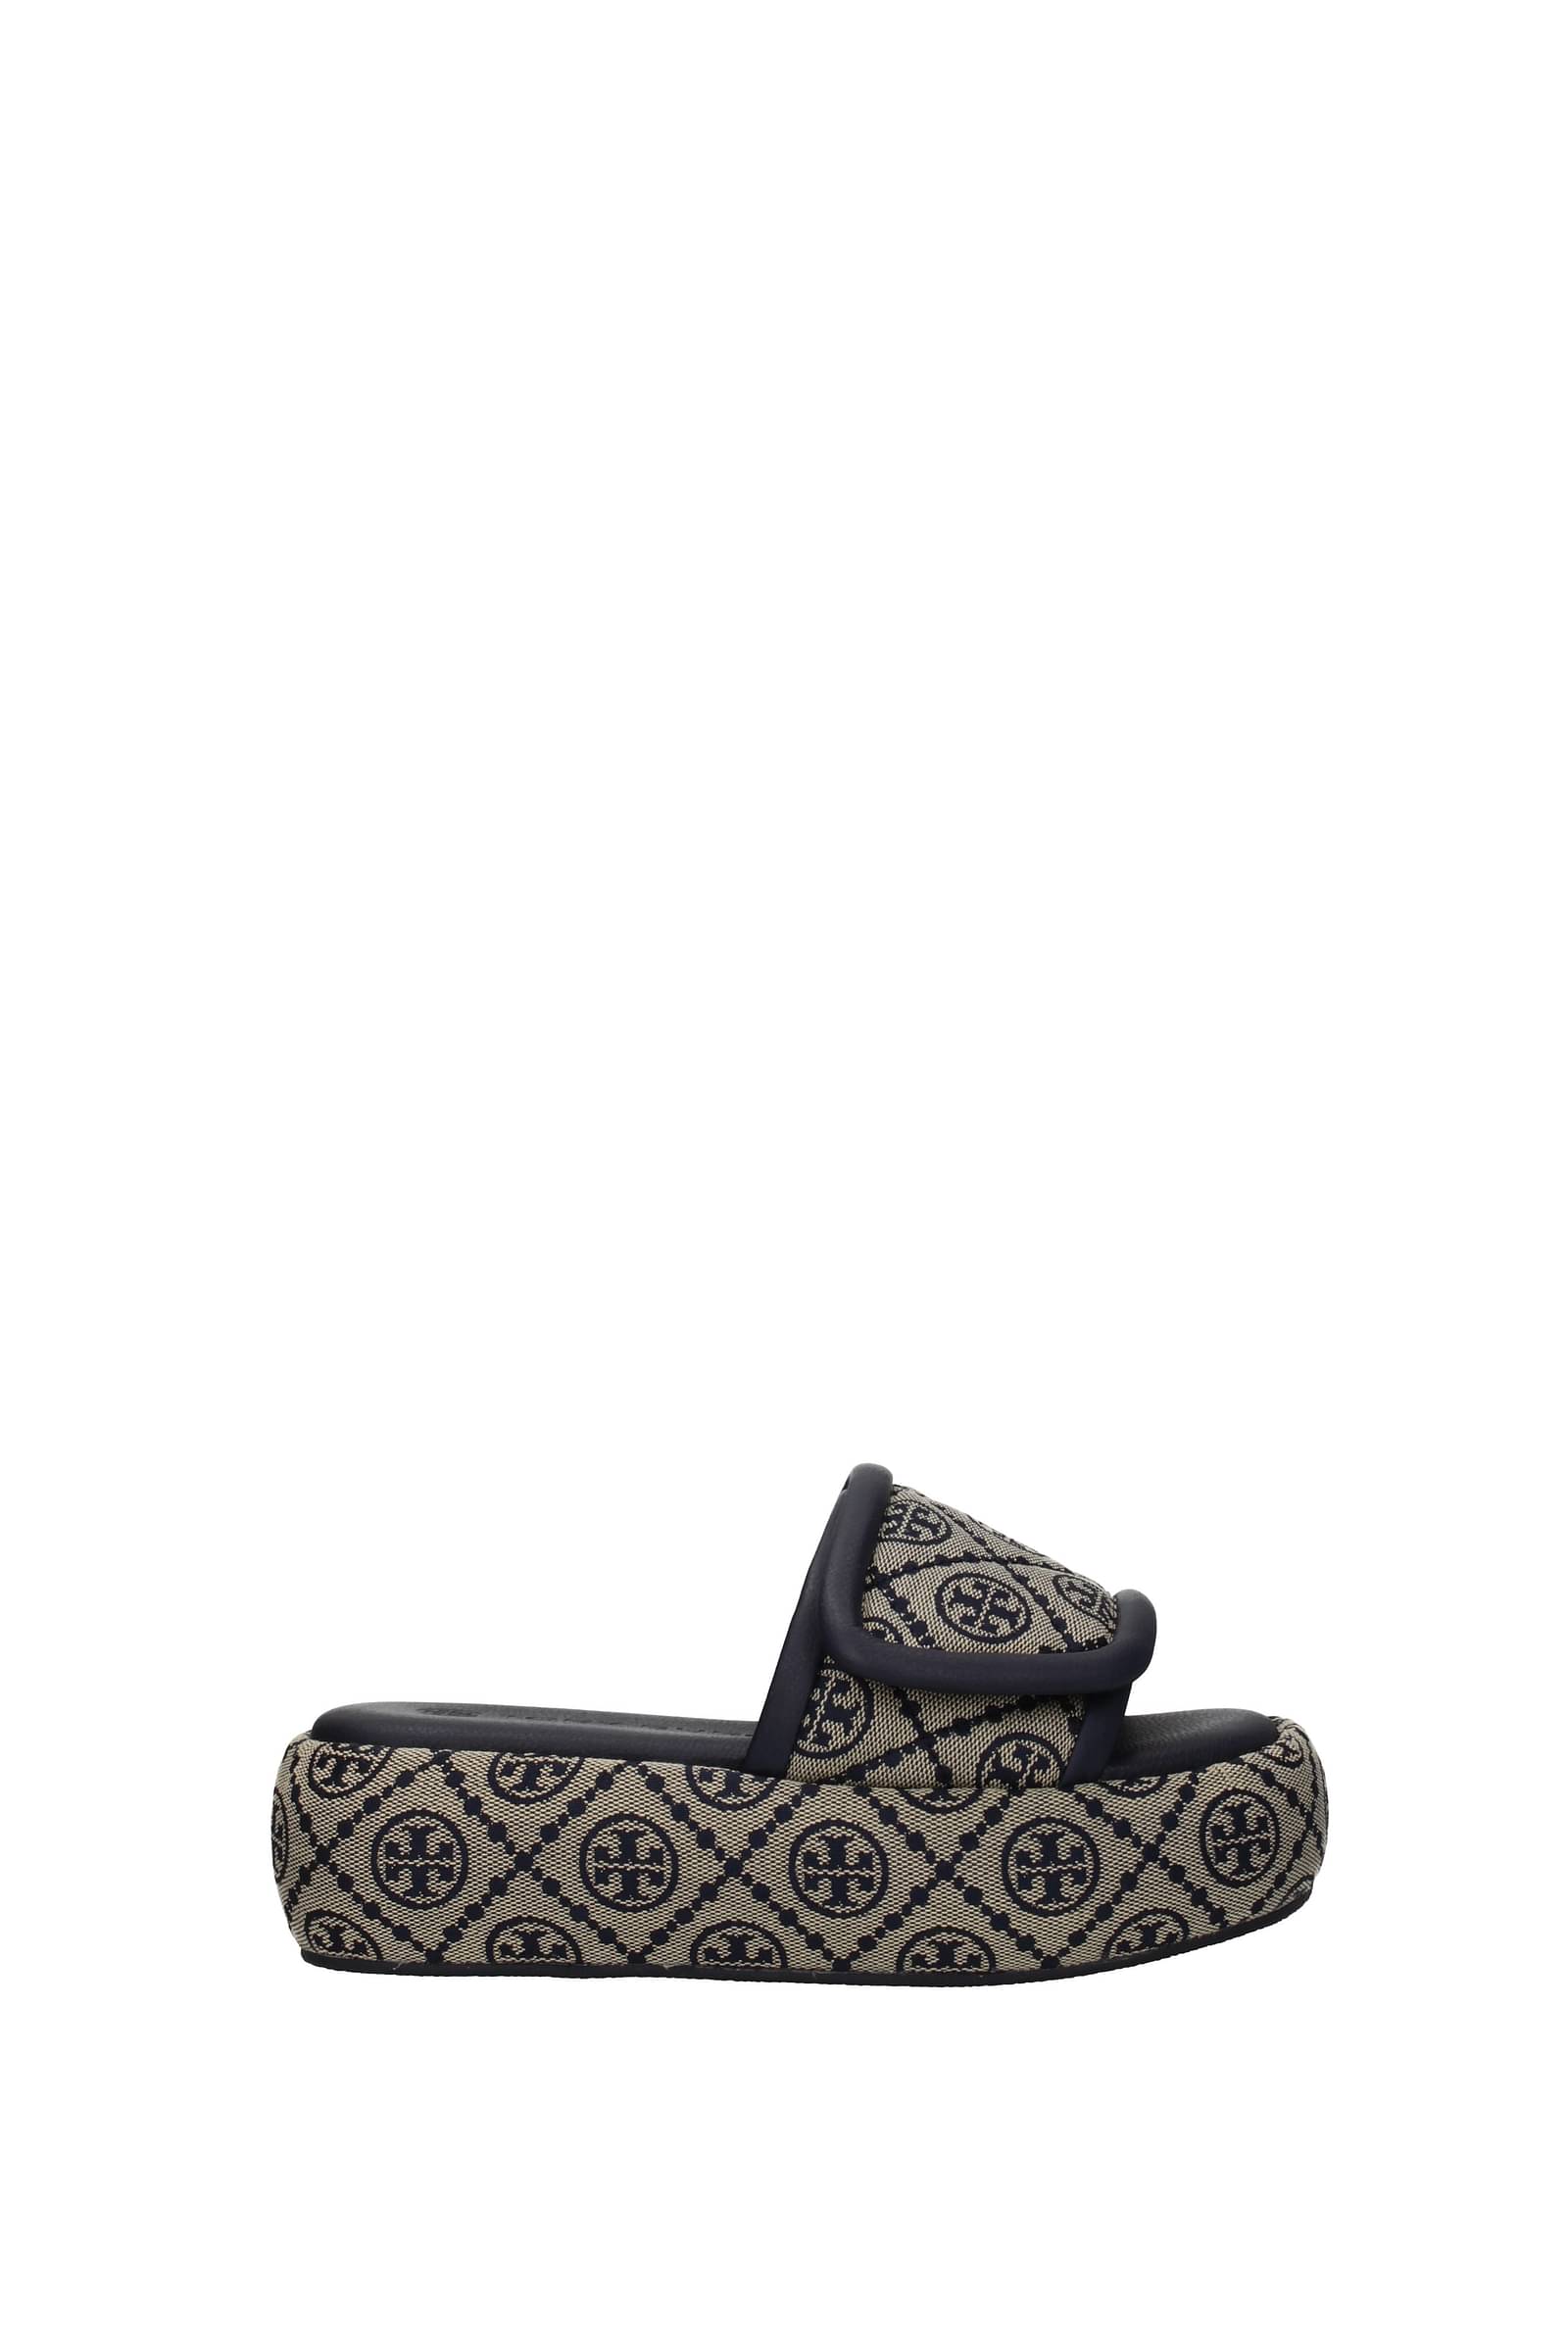 Honest Tory Burch Miller Sandals Review: Are They Worth It?